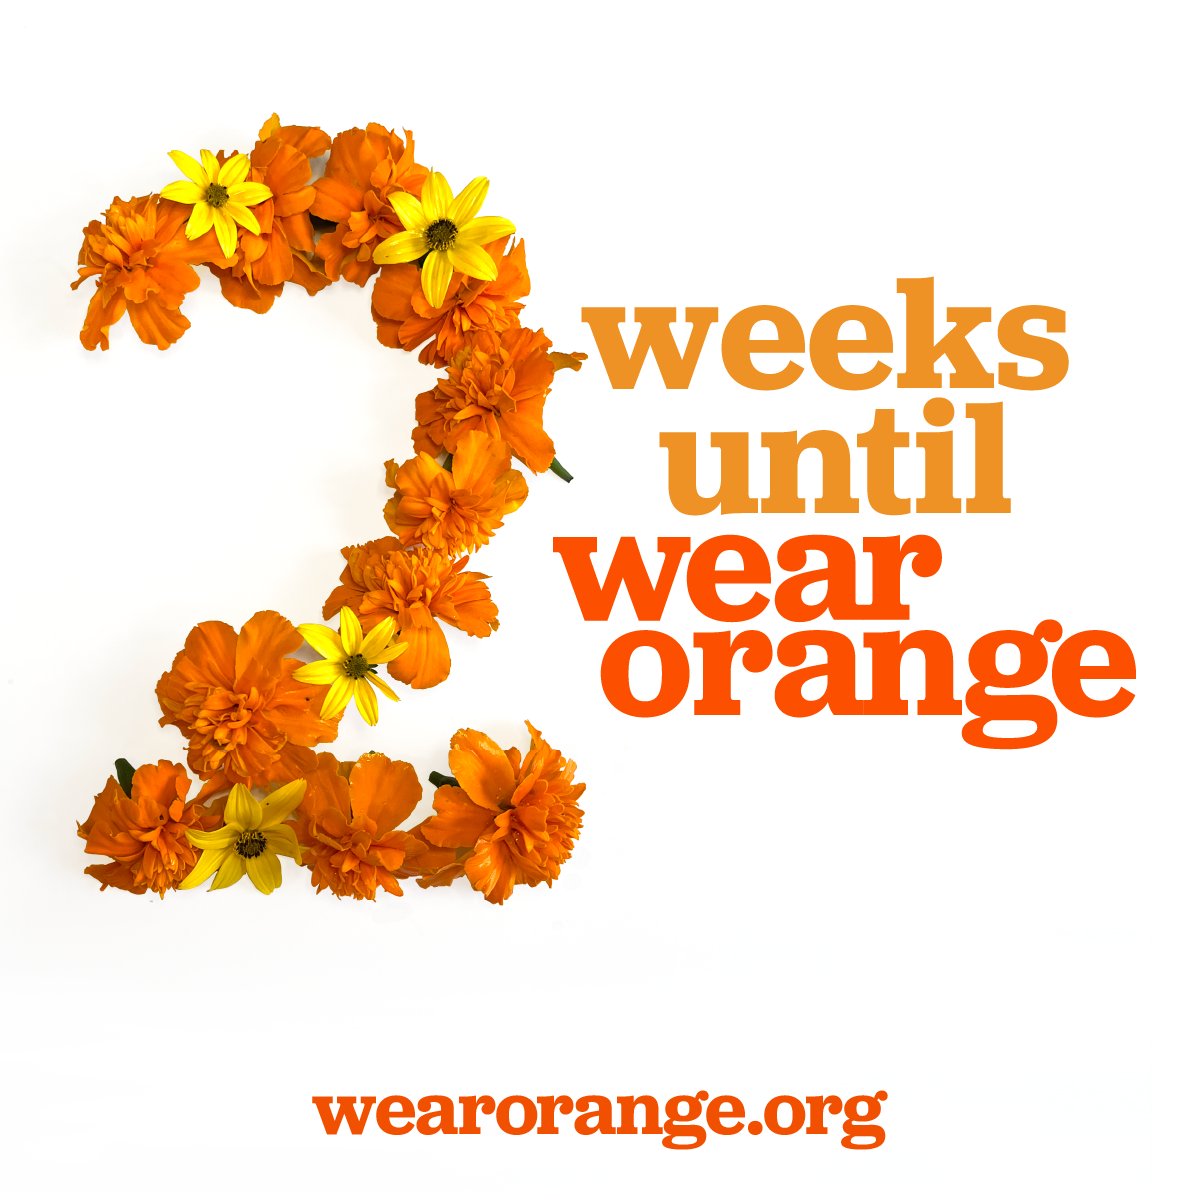 In just two weeks, people across the country will unite to spread awareness about the gun violence crisis that steals 120 lives and wounds hundreds more every day. #WearOrange